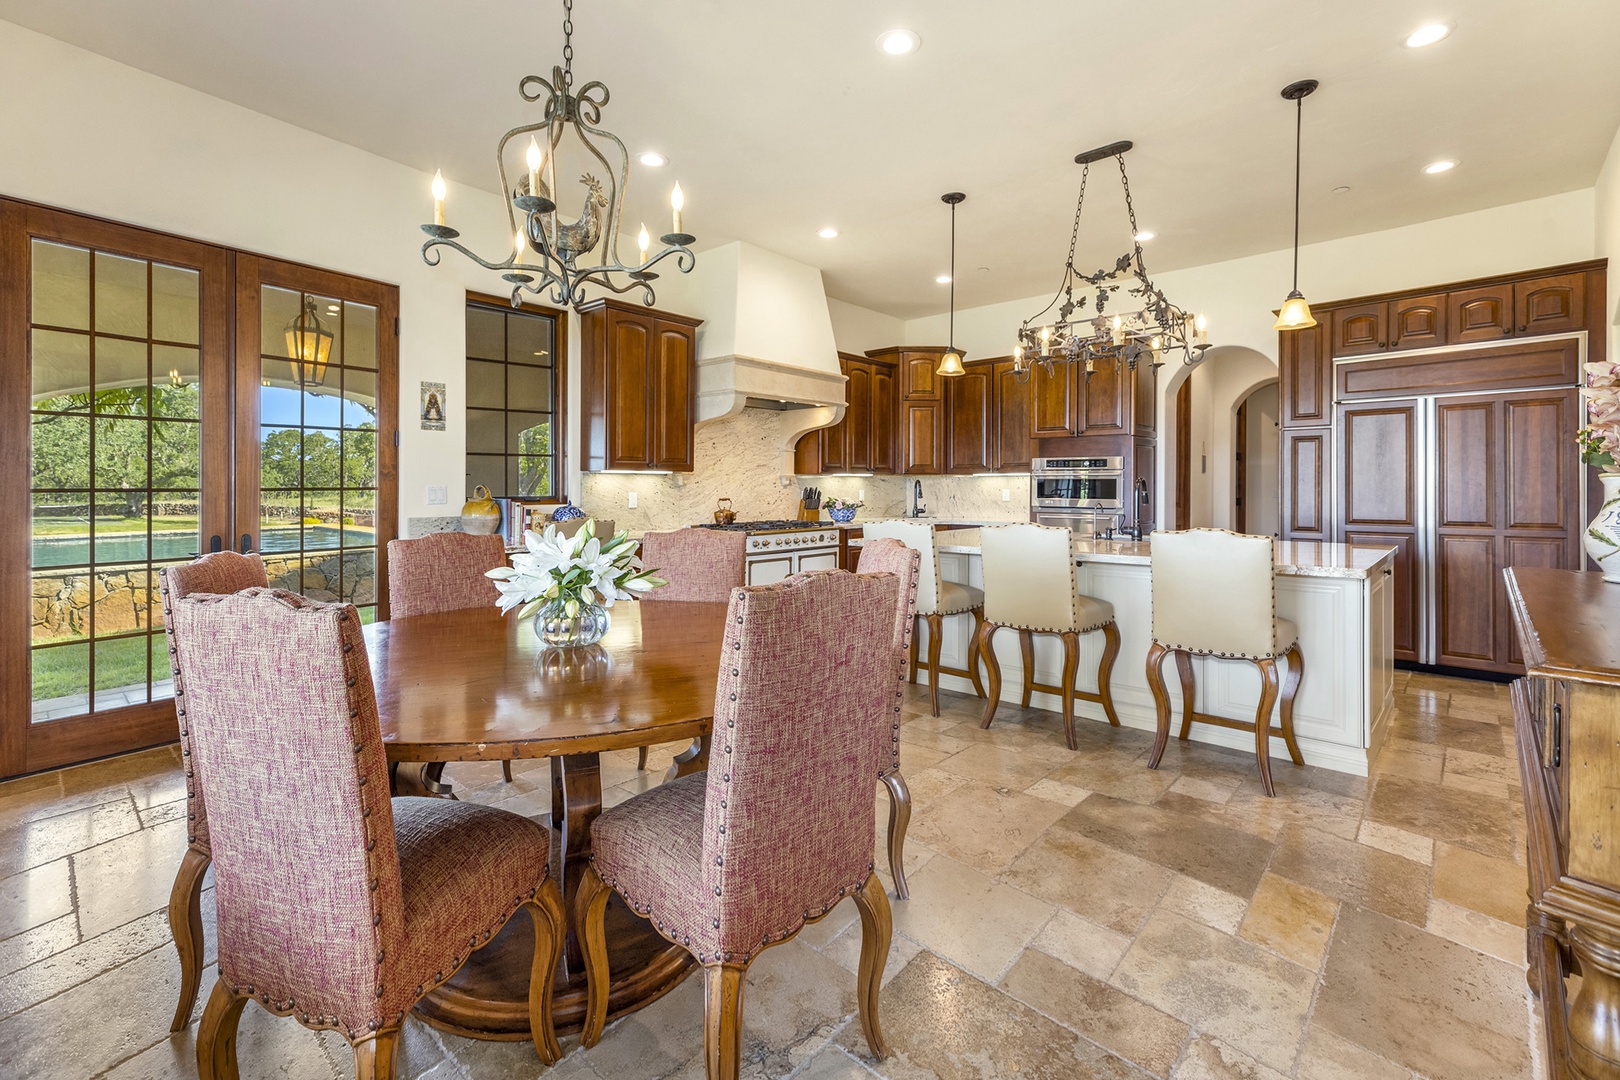 Fairfield Vacation Rentals, Villa Capricho - Guests can sit at the breakfast bar, dine in the breakfast nook, or opt for a more formal dining experience in the elegant dining room